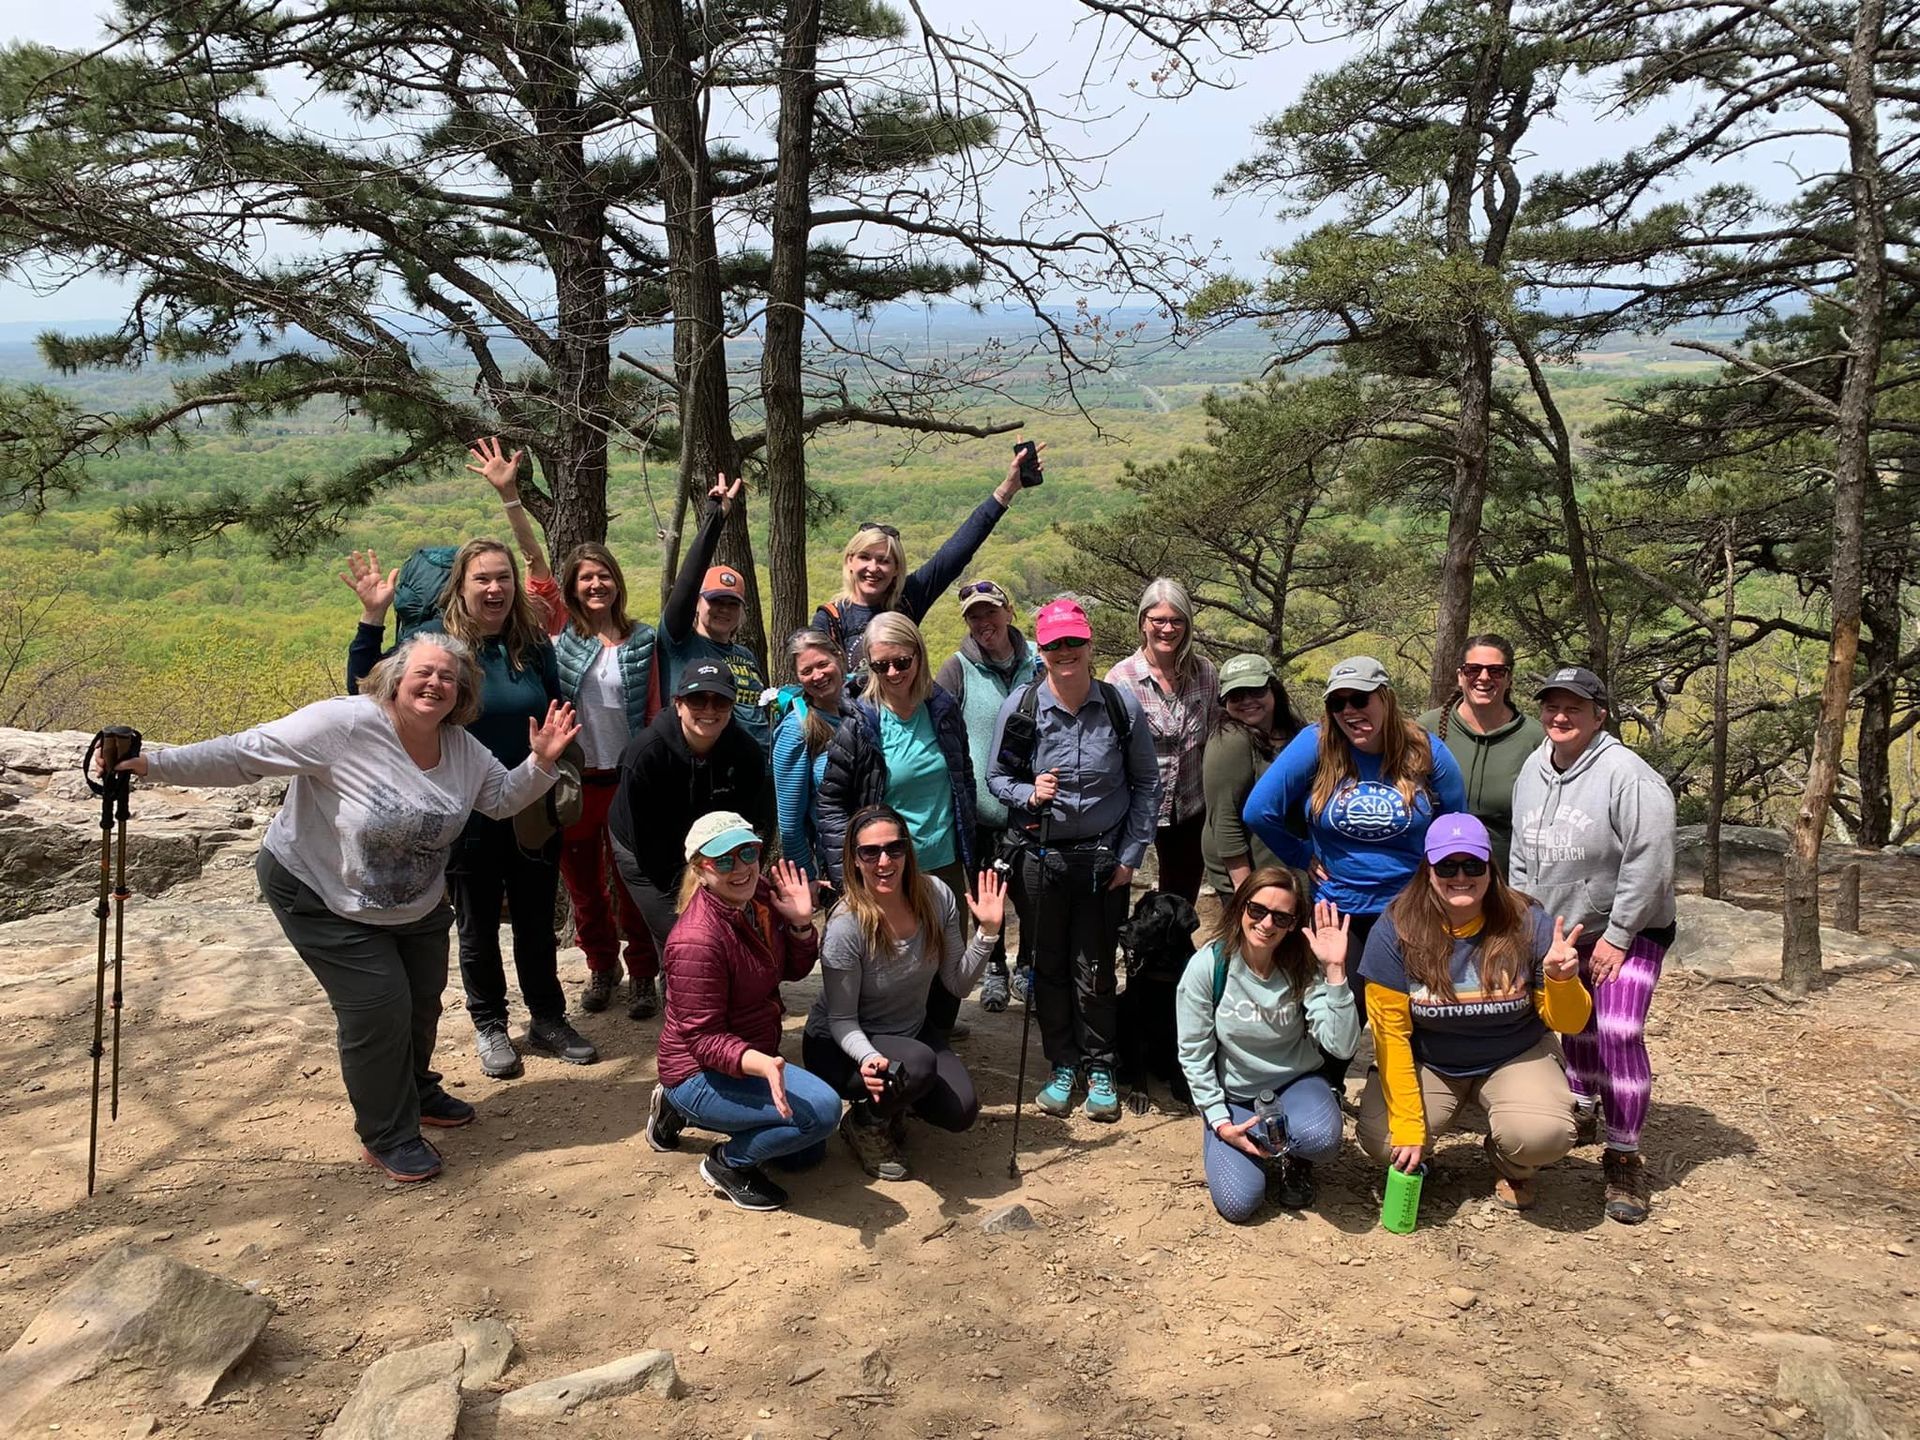 A group of female hikers posing together for a photo, on top of a summit in the mountains.